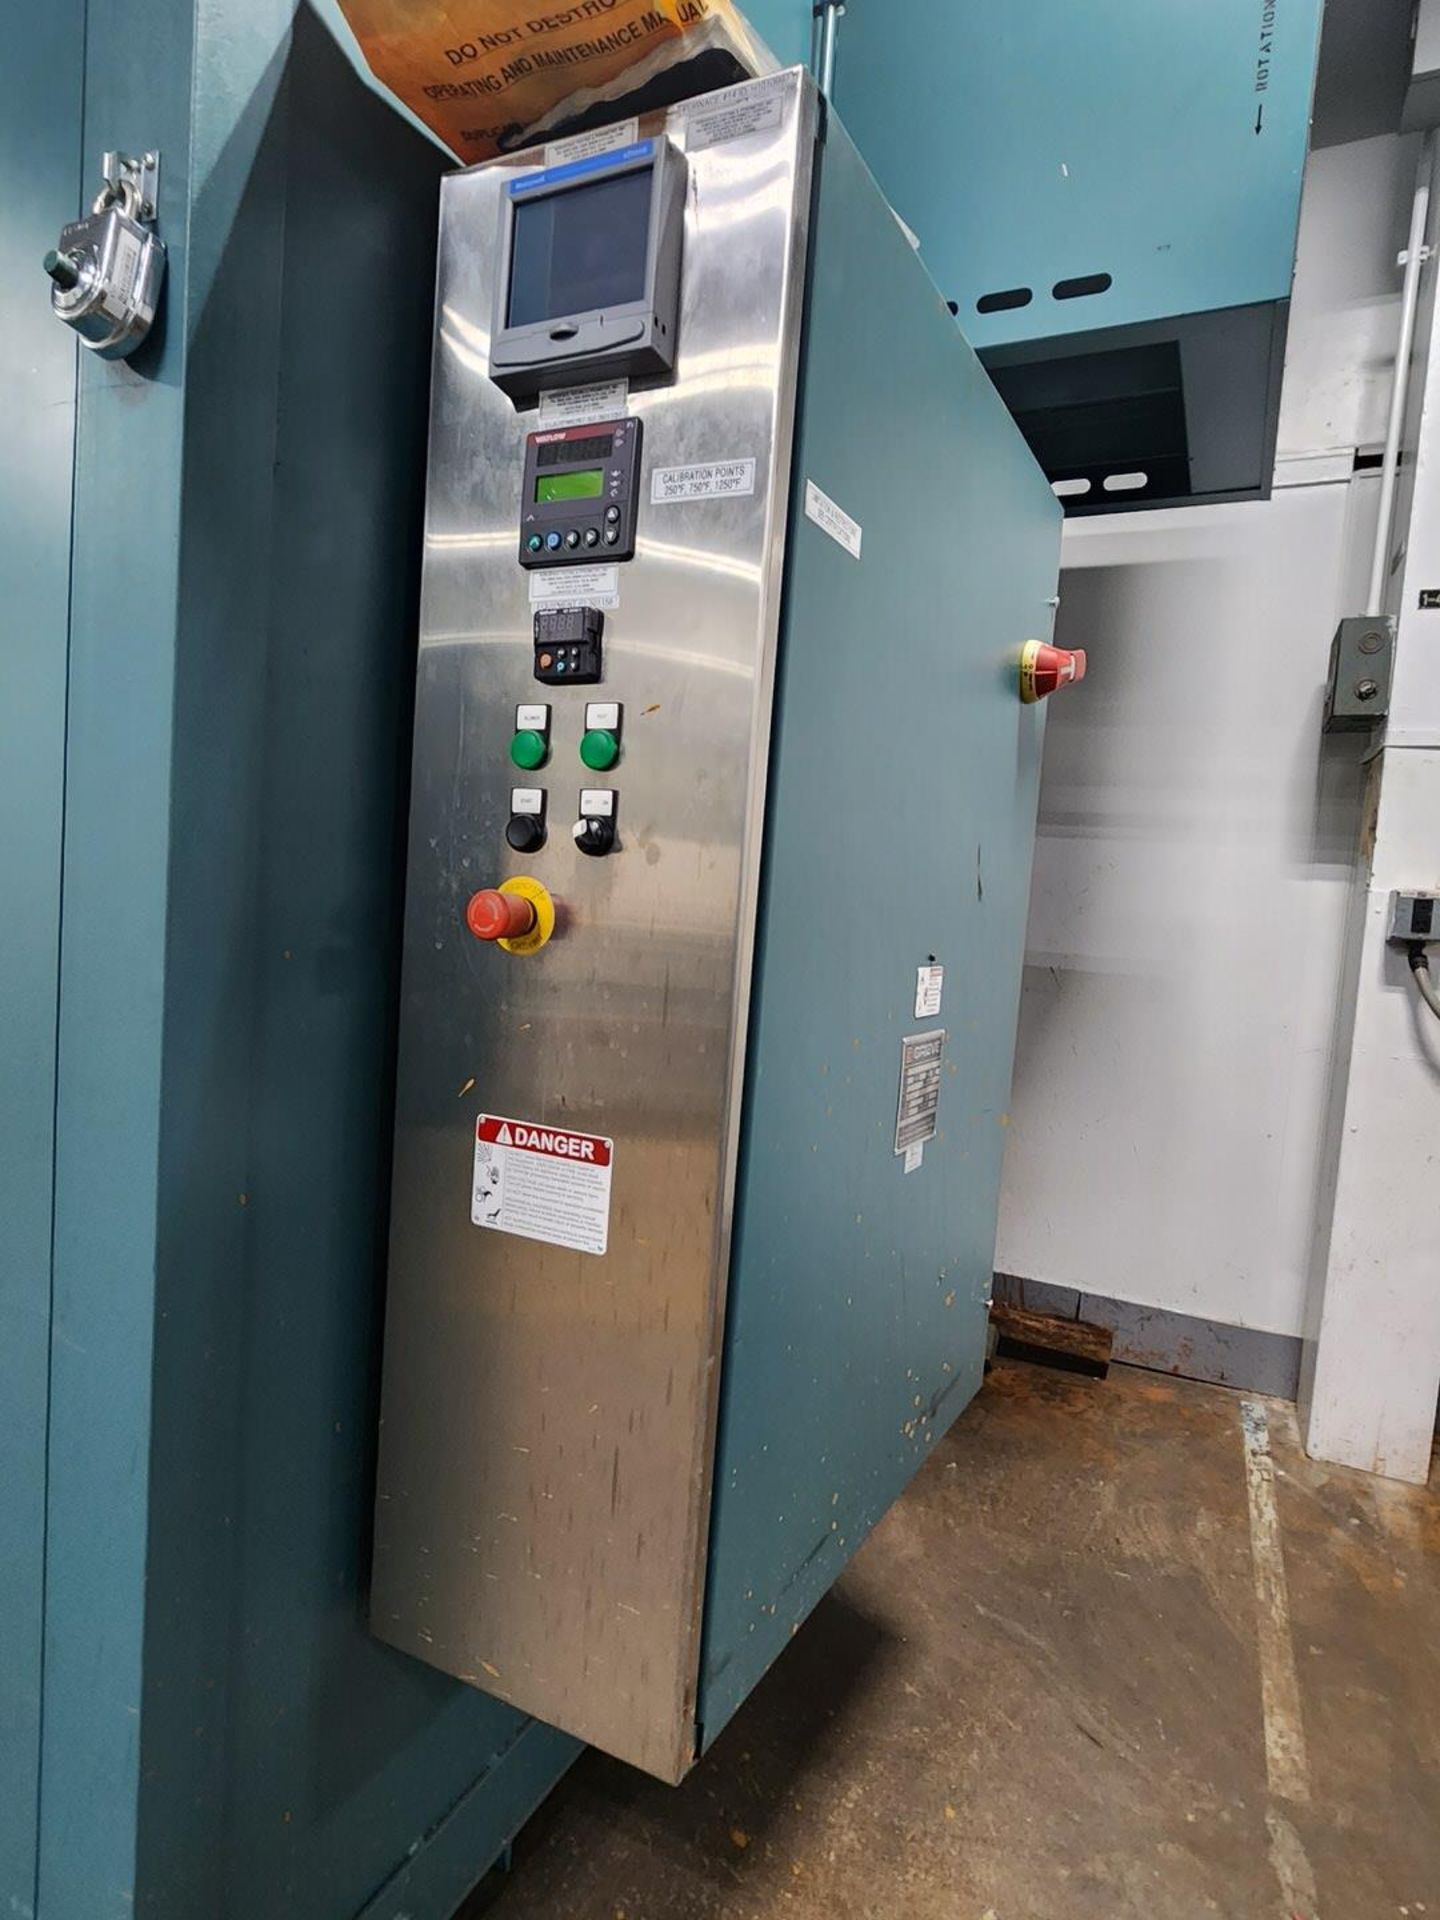 Grieve HC-1250 Oven 120kW, 1250F Max Temp - Image 8 of 12